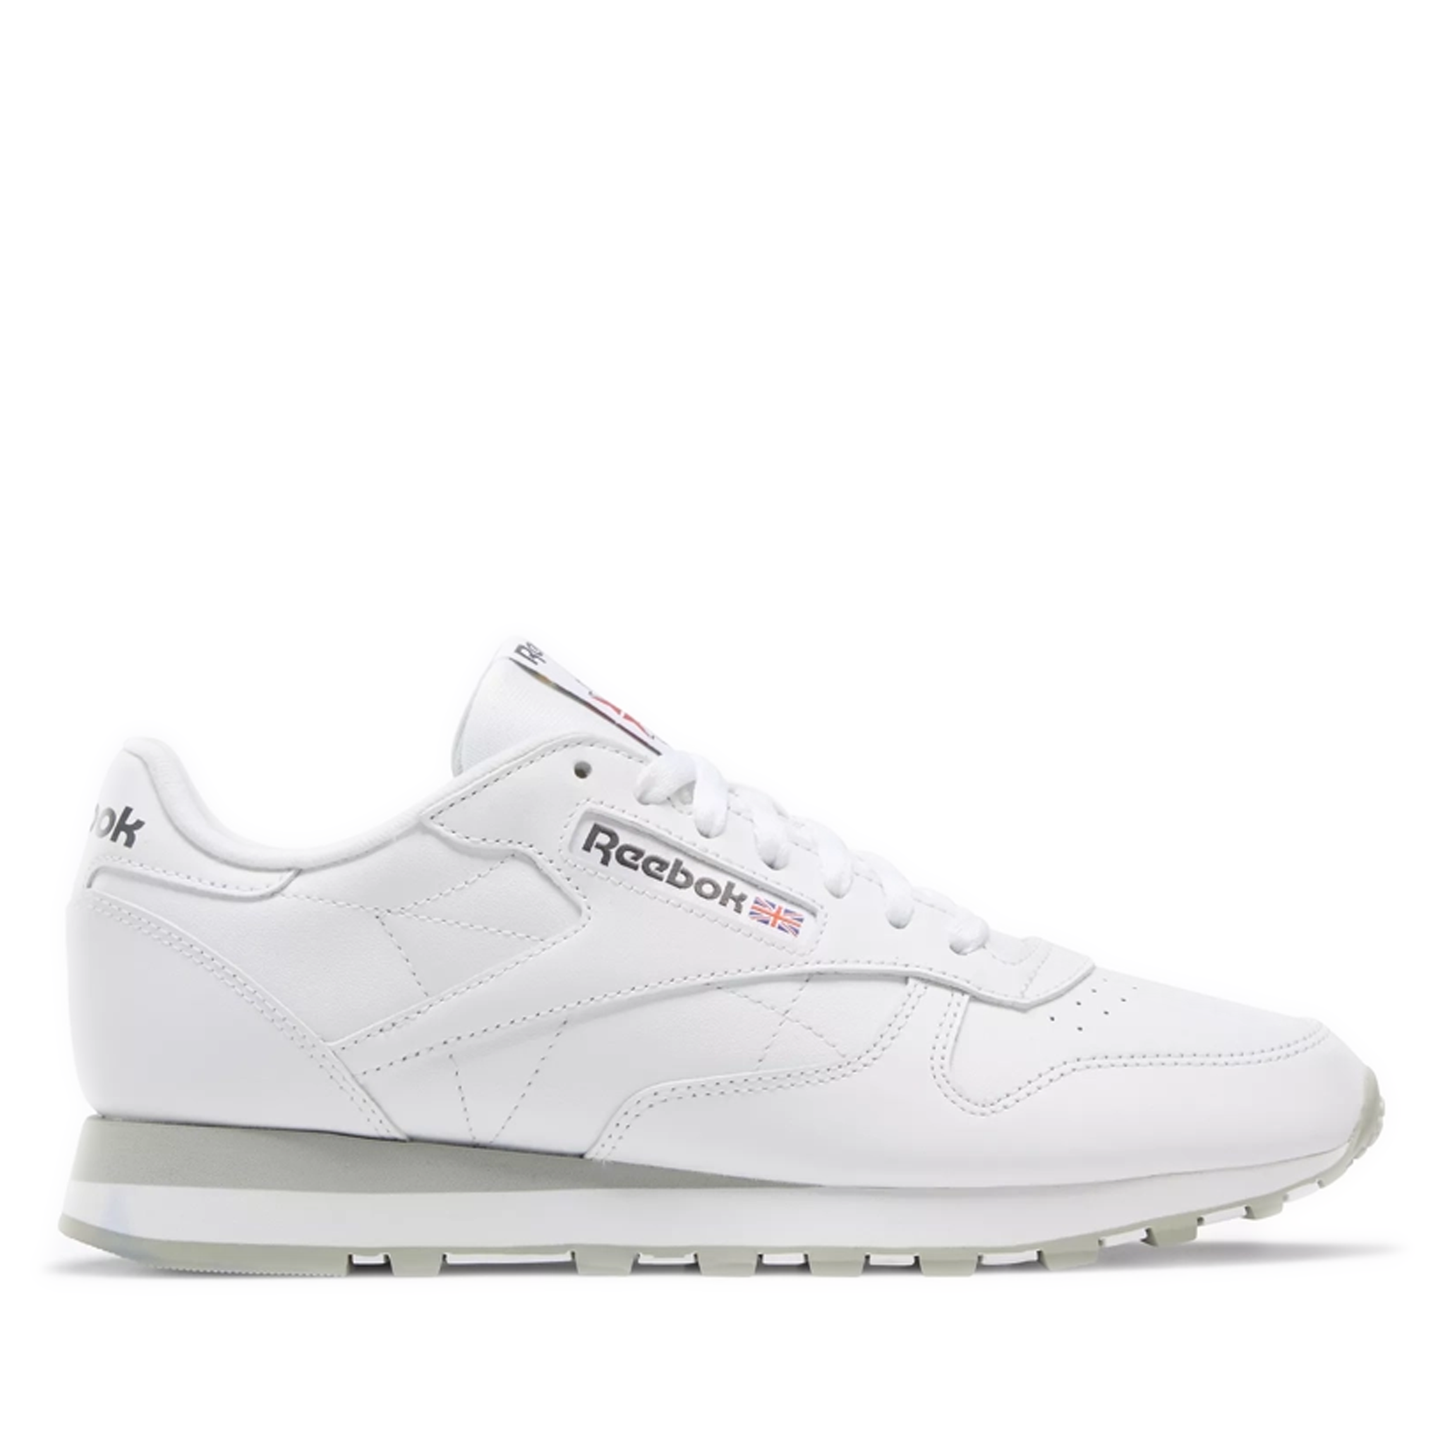 Men's Reebok Classic Leather Shoes - Ftwr White / Pure Grey 3 / Pure Grey 7